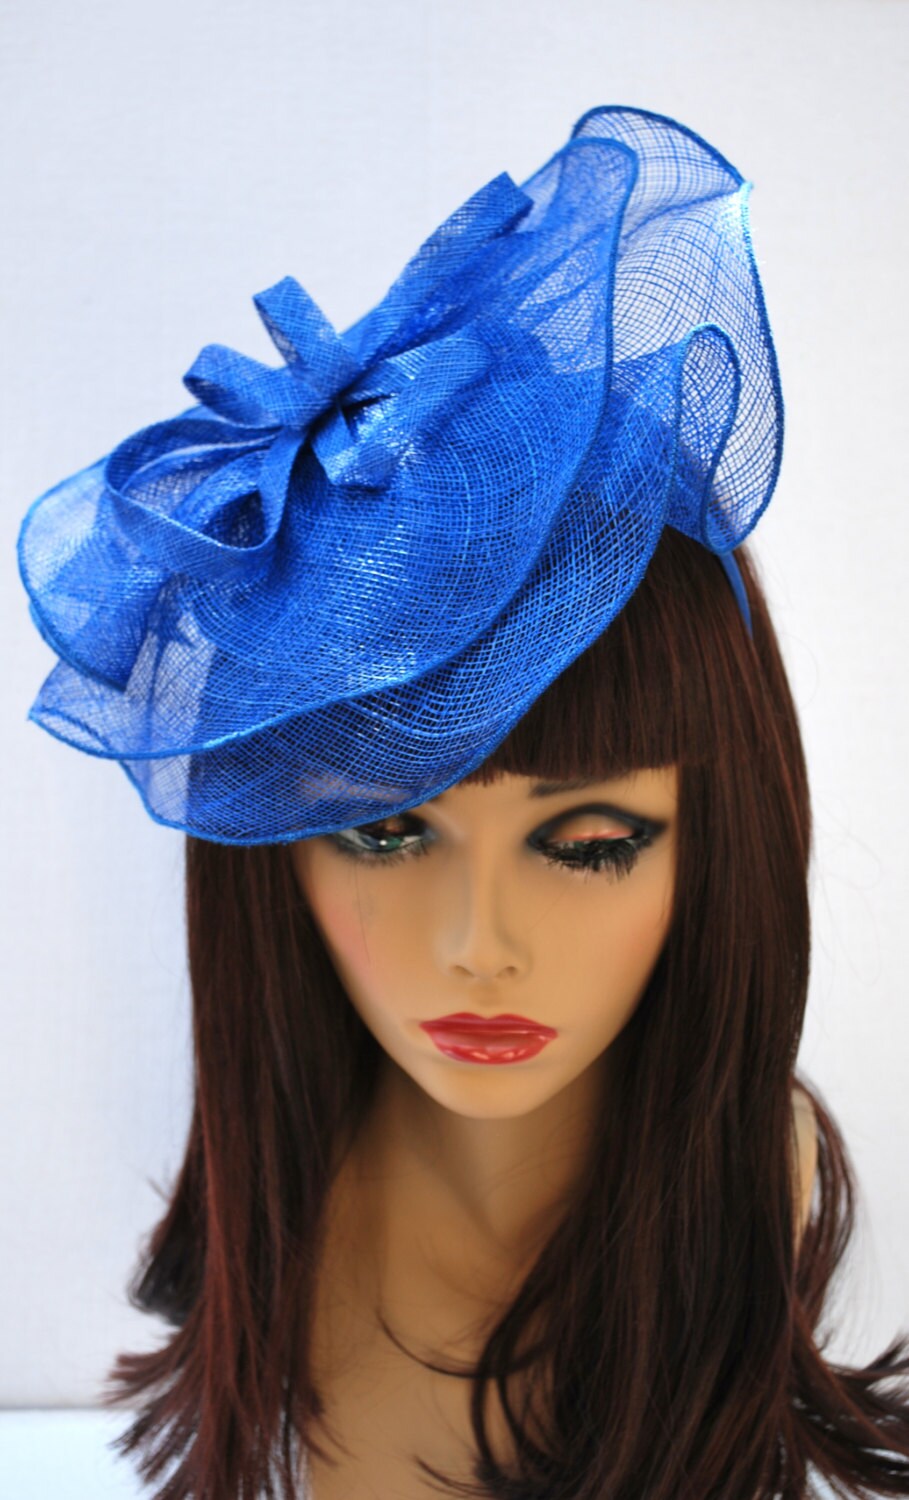 Royal Blue Fascinator Tea Party Hat Church Hat by QueenSugarBee